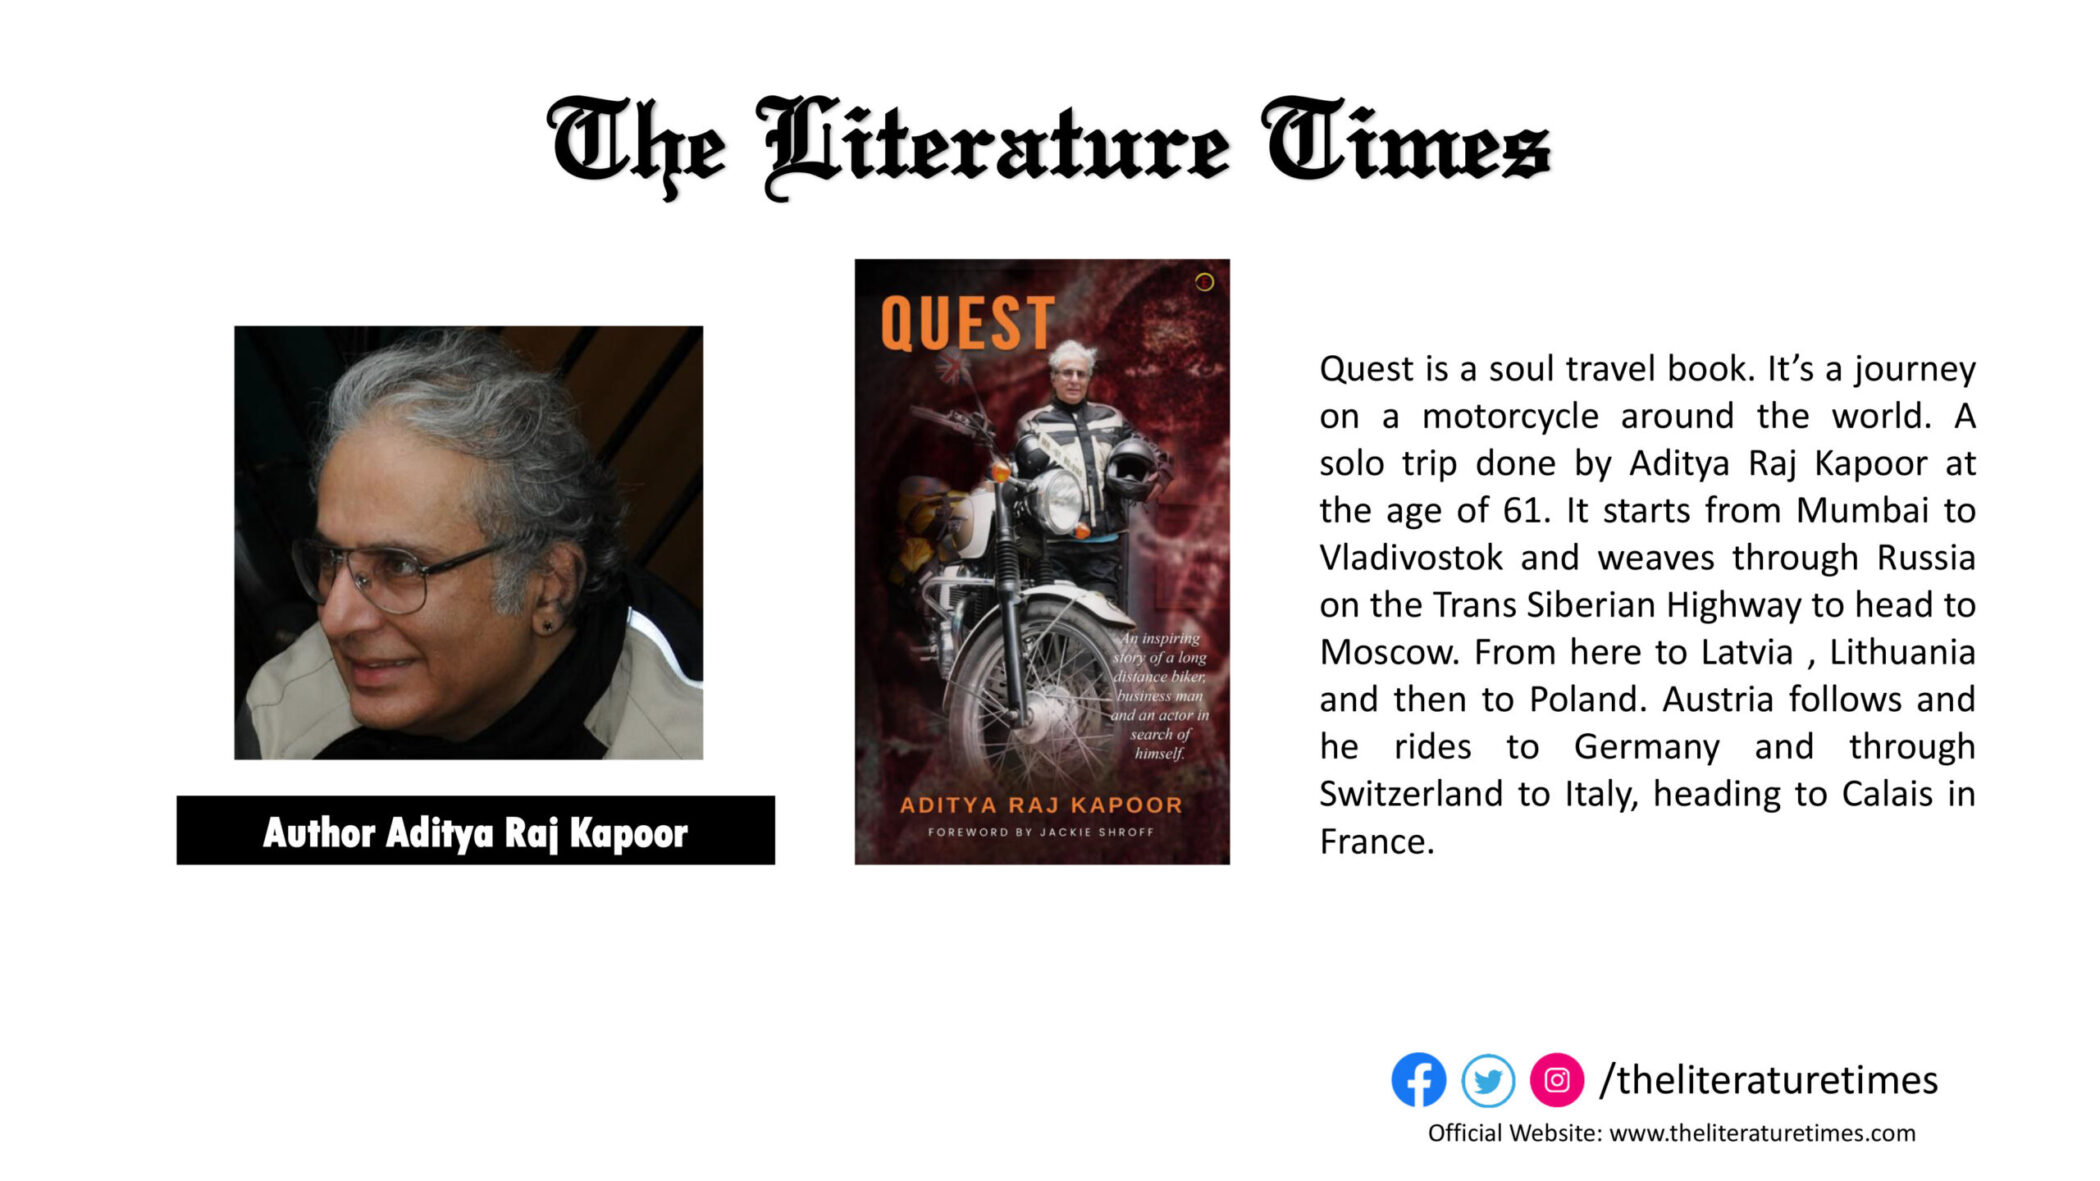 An Interview With the Author of the Book “Quest” -Aditya Raj Kapoor